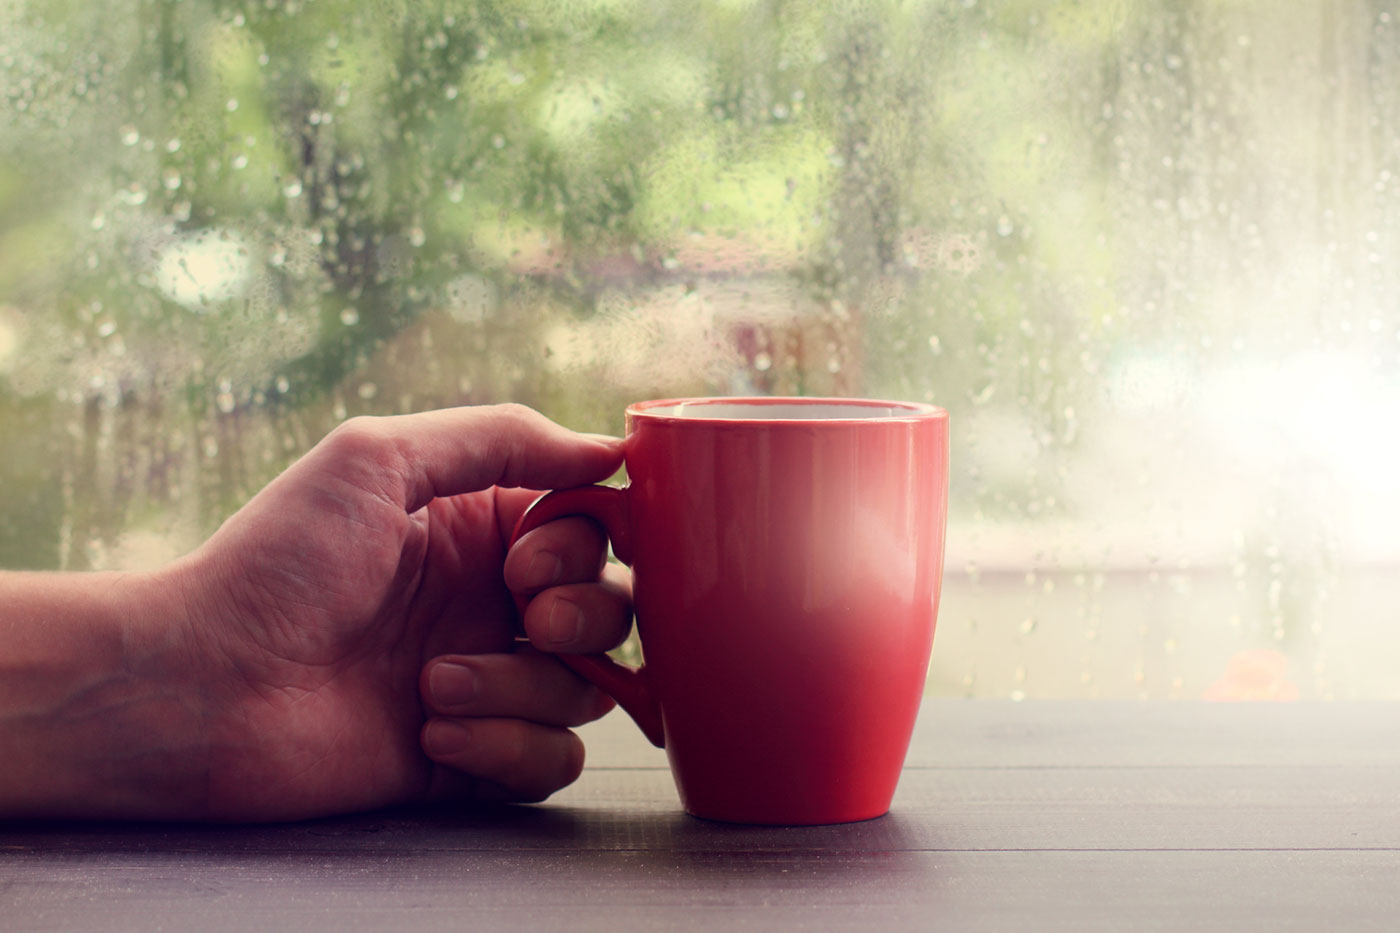 hand grasping cup infront of rain soaked window